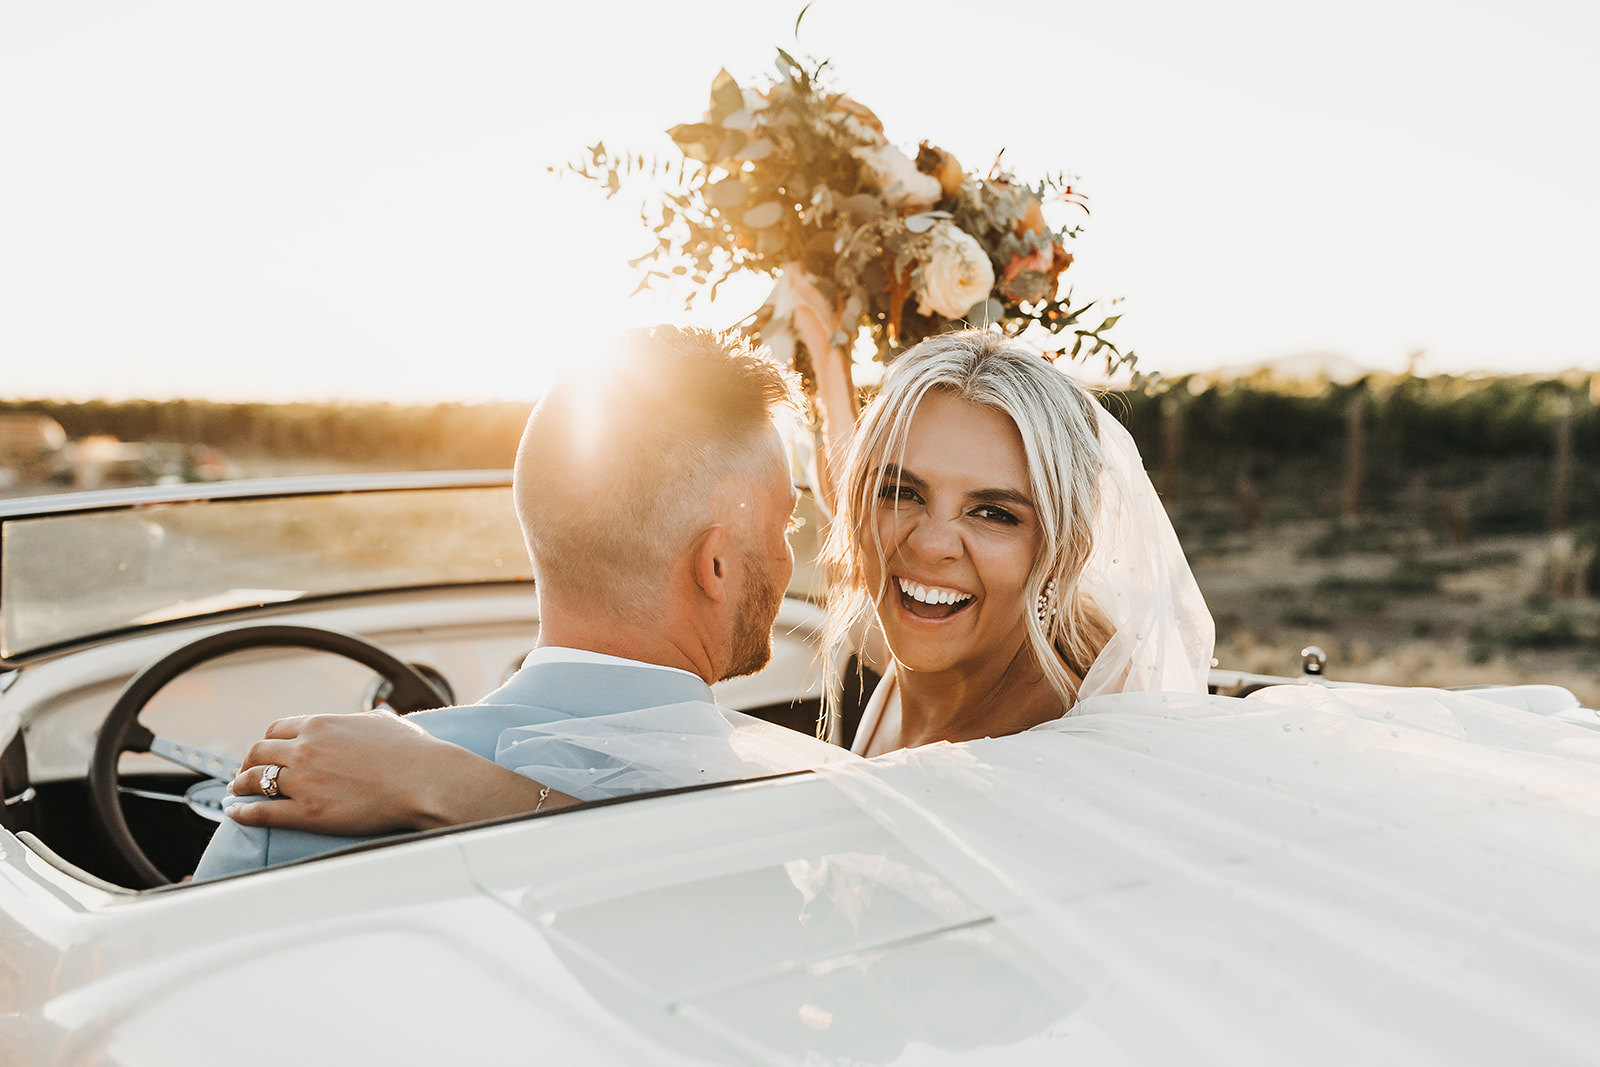 Golden hour photos of bride and groom in a beautiful classic car